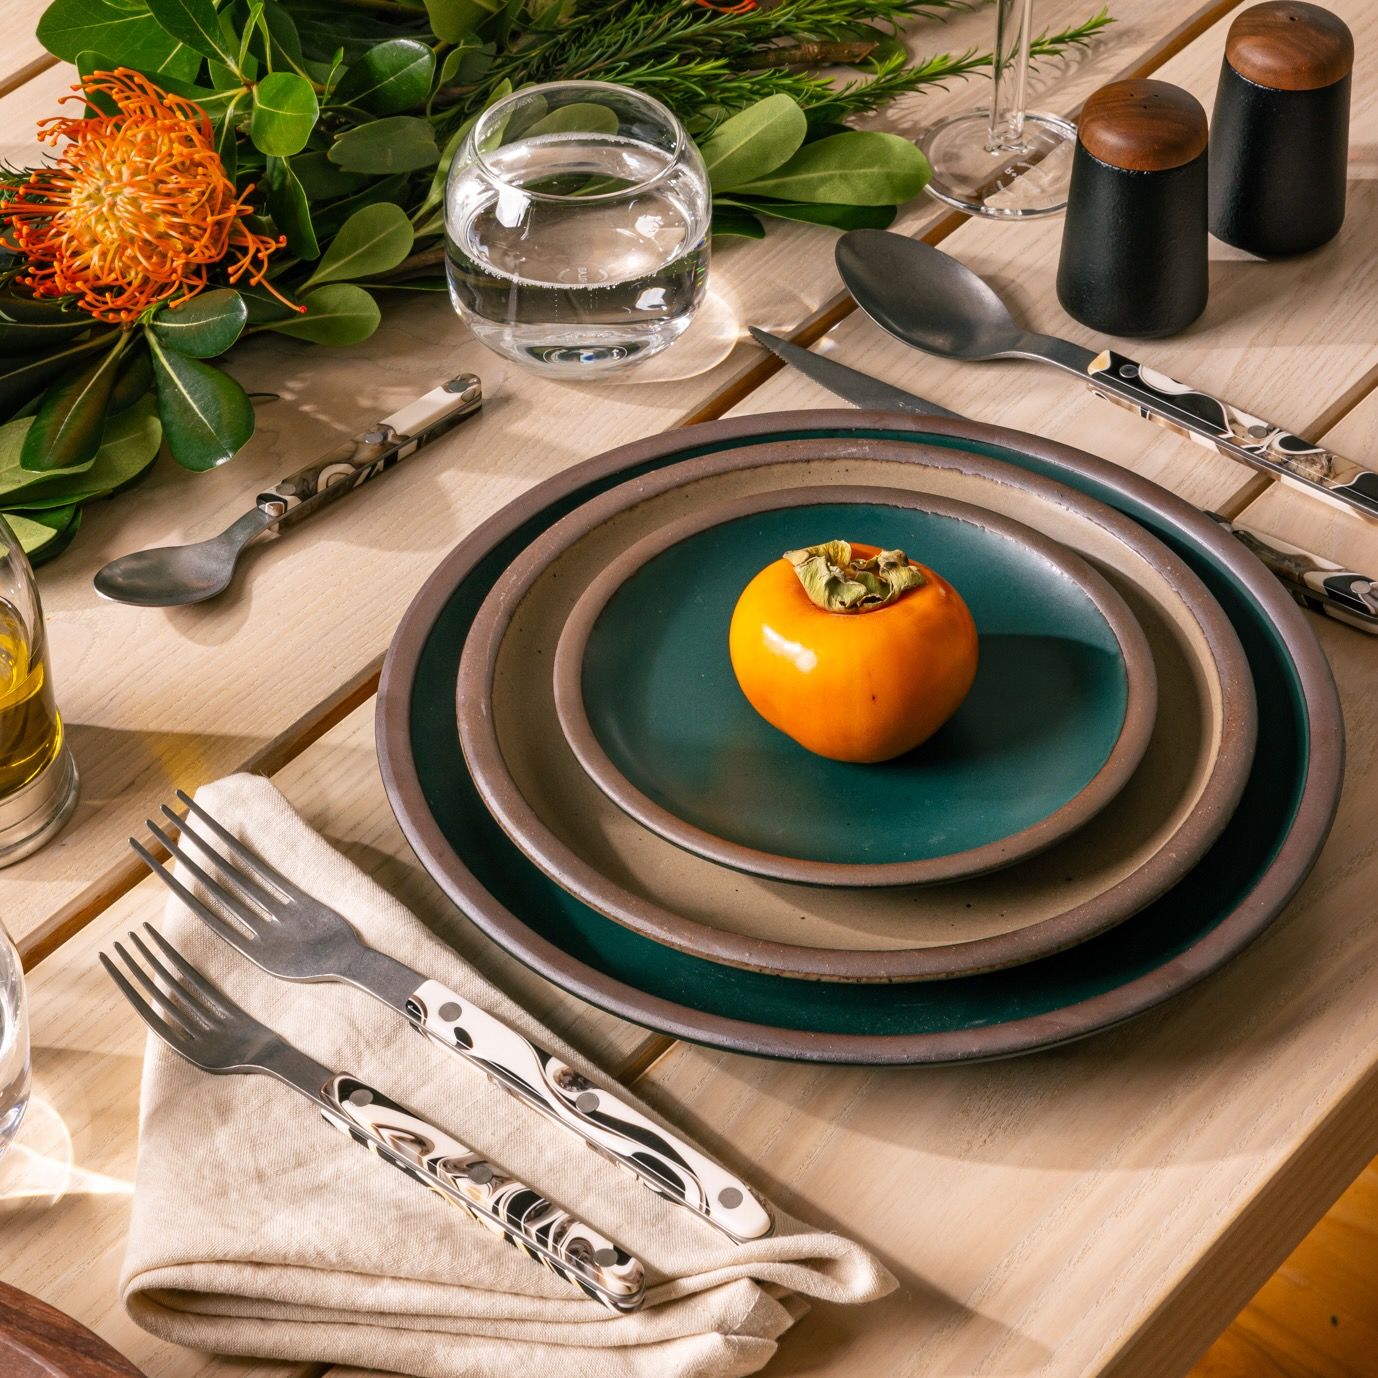 A place setting featuring dark teal and natural colored ceramic plates with black, white and cream marble handled cutlery (salad fork, dinner fork, knife, soup spoon and teaspoon), Also pictured is a folded neutral dinner napkin, an a rounded stemless glass filled with water.